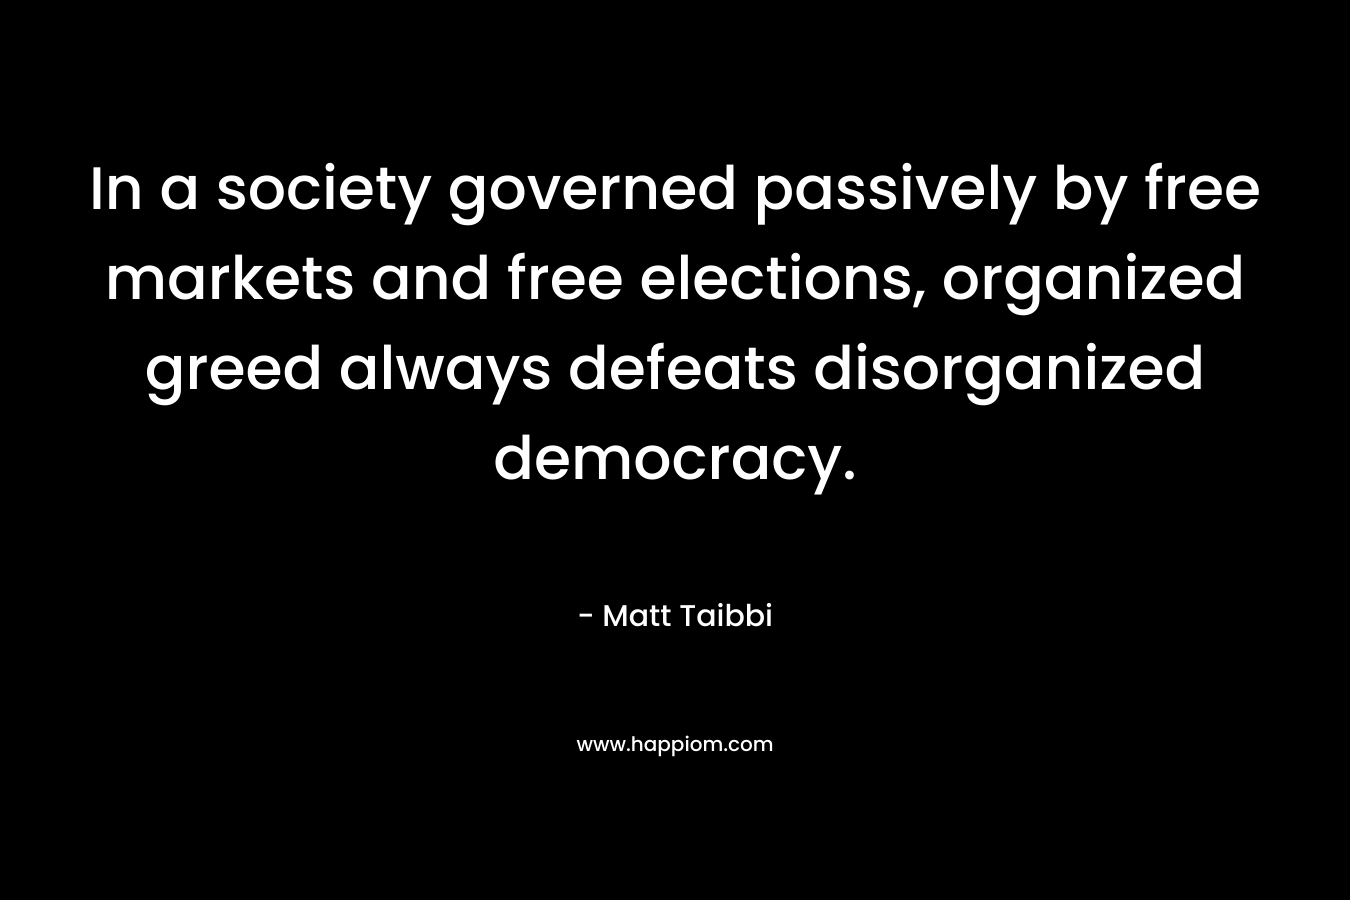 In a society governed passively by free markets and free elections, organized greed always defeats disorganized democracy. – Matt Taibbi